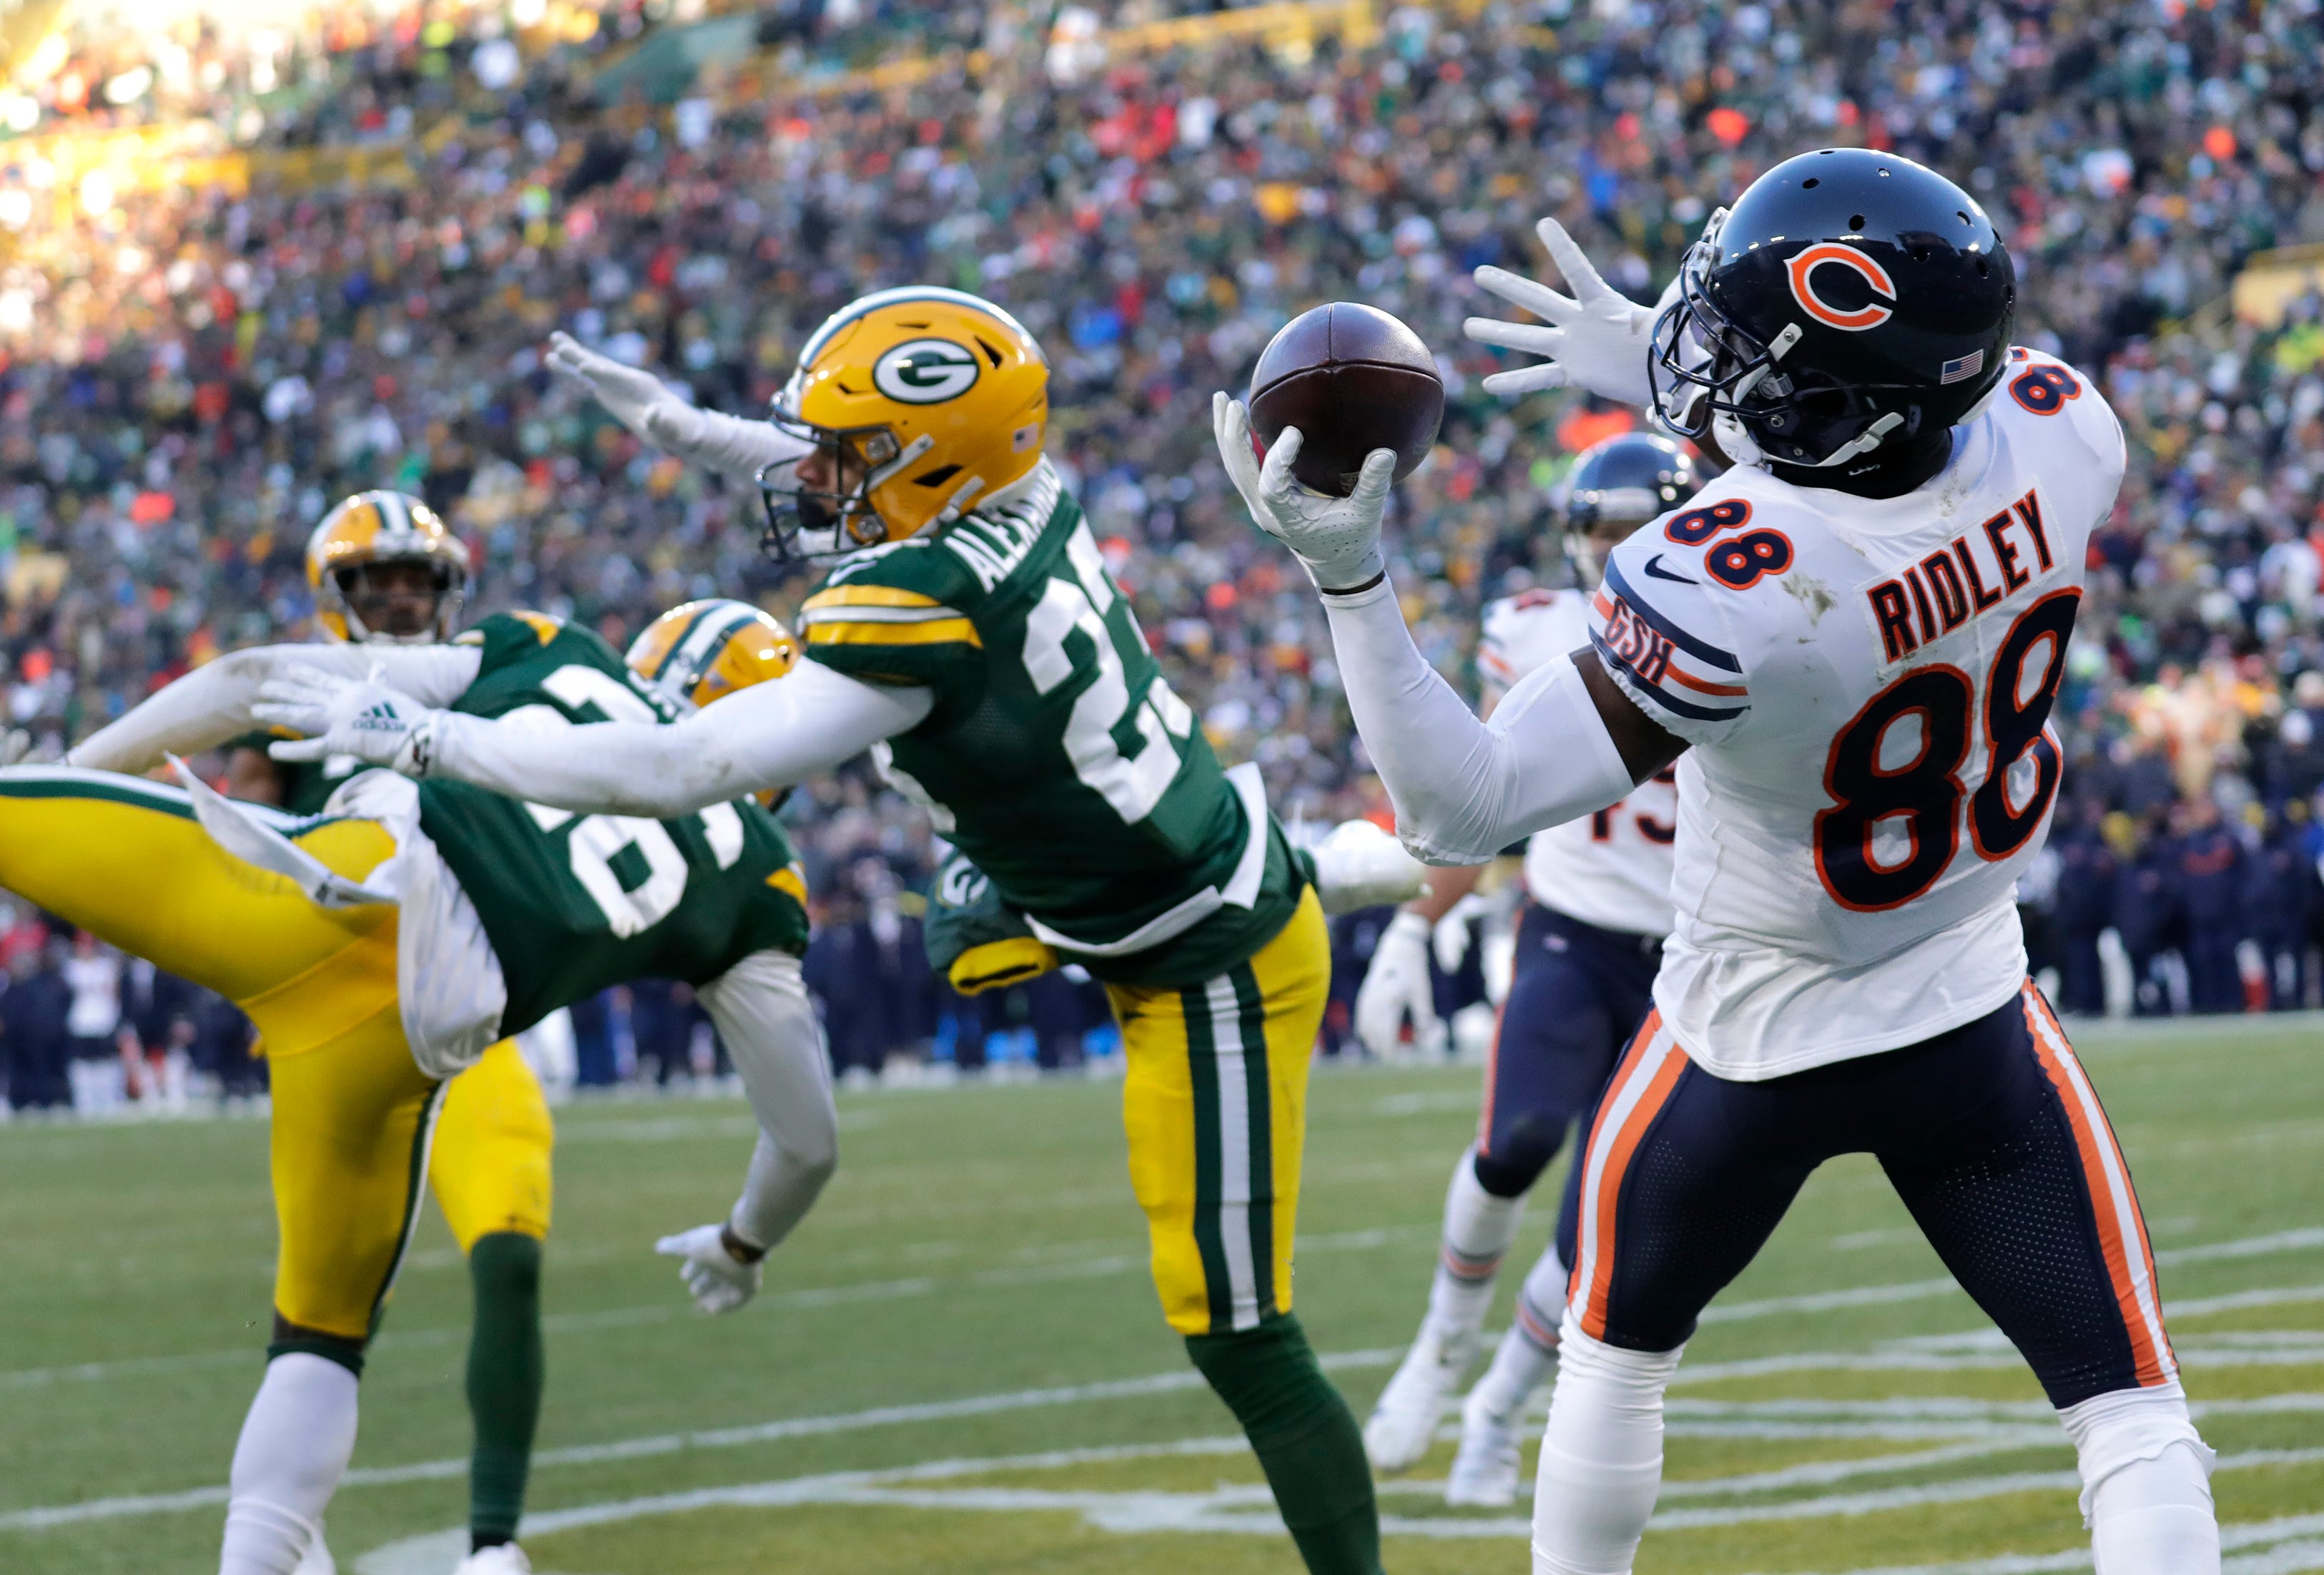 Chicago Bears wide receiver Riley Ridley (88) can't catch a pass to the back of the end zone on the second to last play of the game against Green Bay Packers free safety Darnell Savage (26) and Jaire Alexander (23) Sunday, December 15, 2019, at Lambeau Field in Green Bay, Wis.